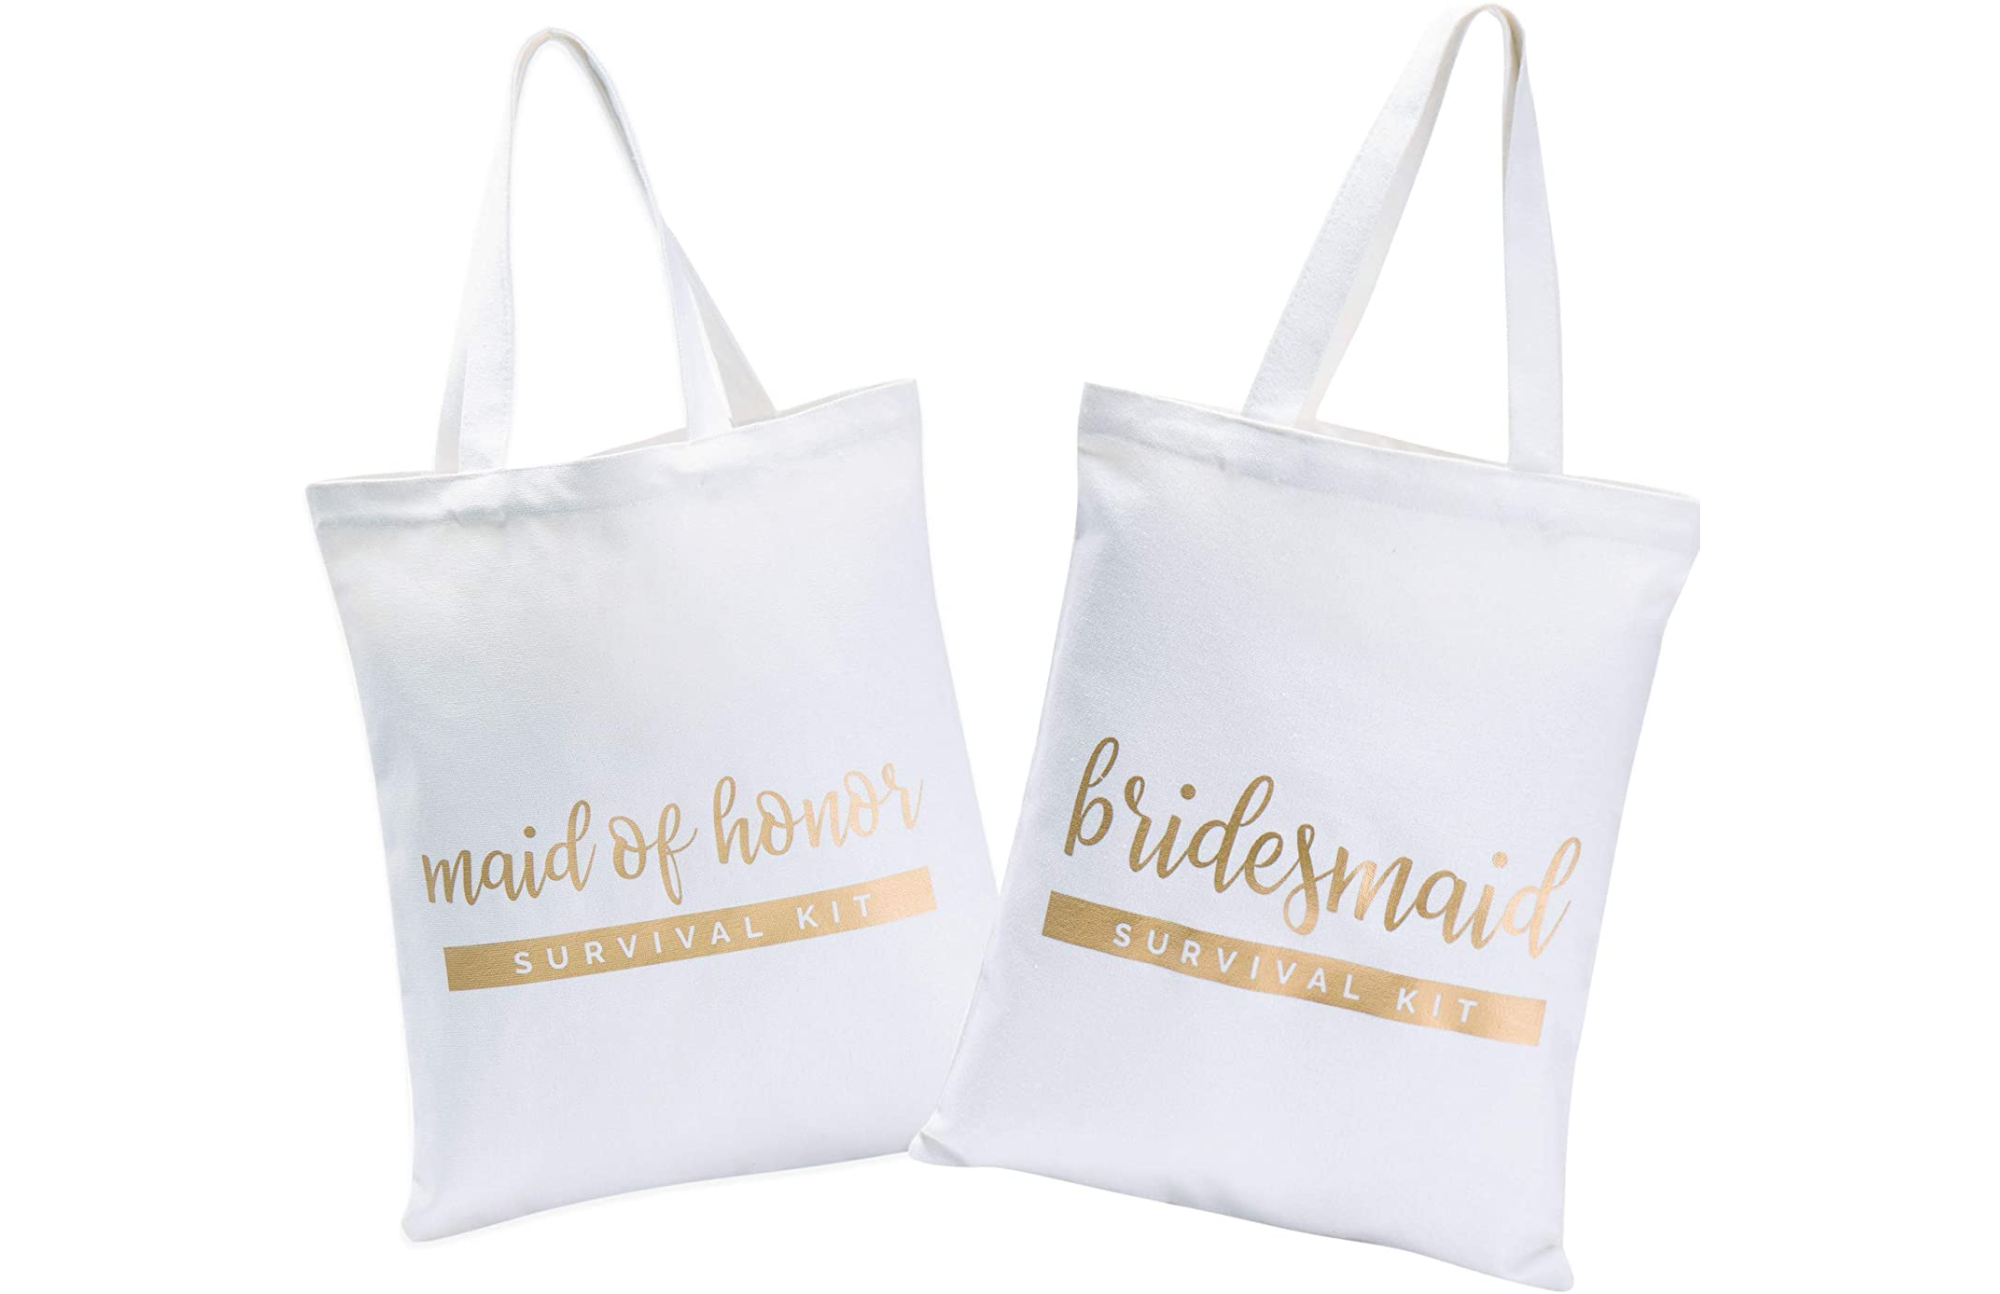 Two white tote bags with printed words